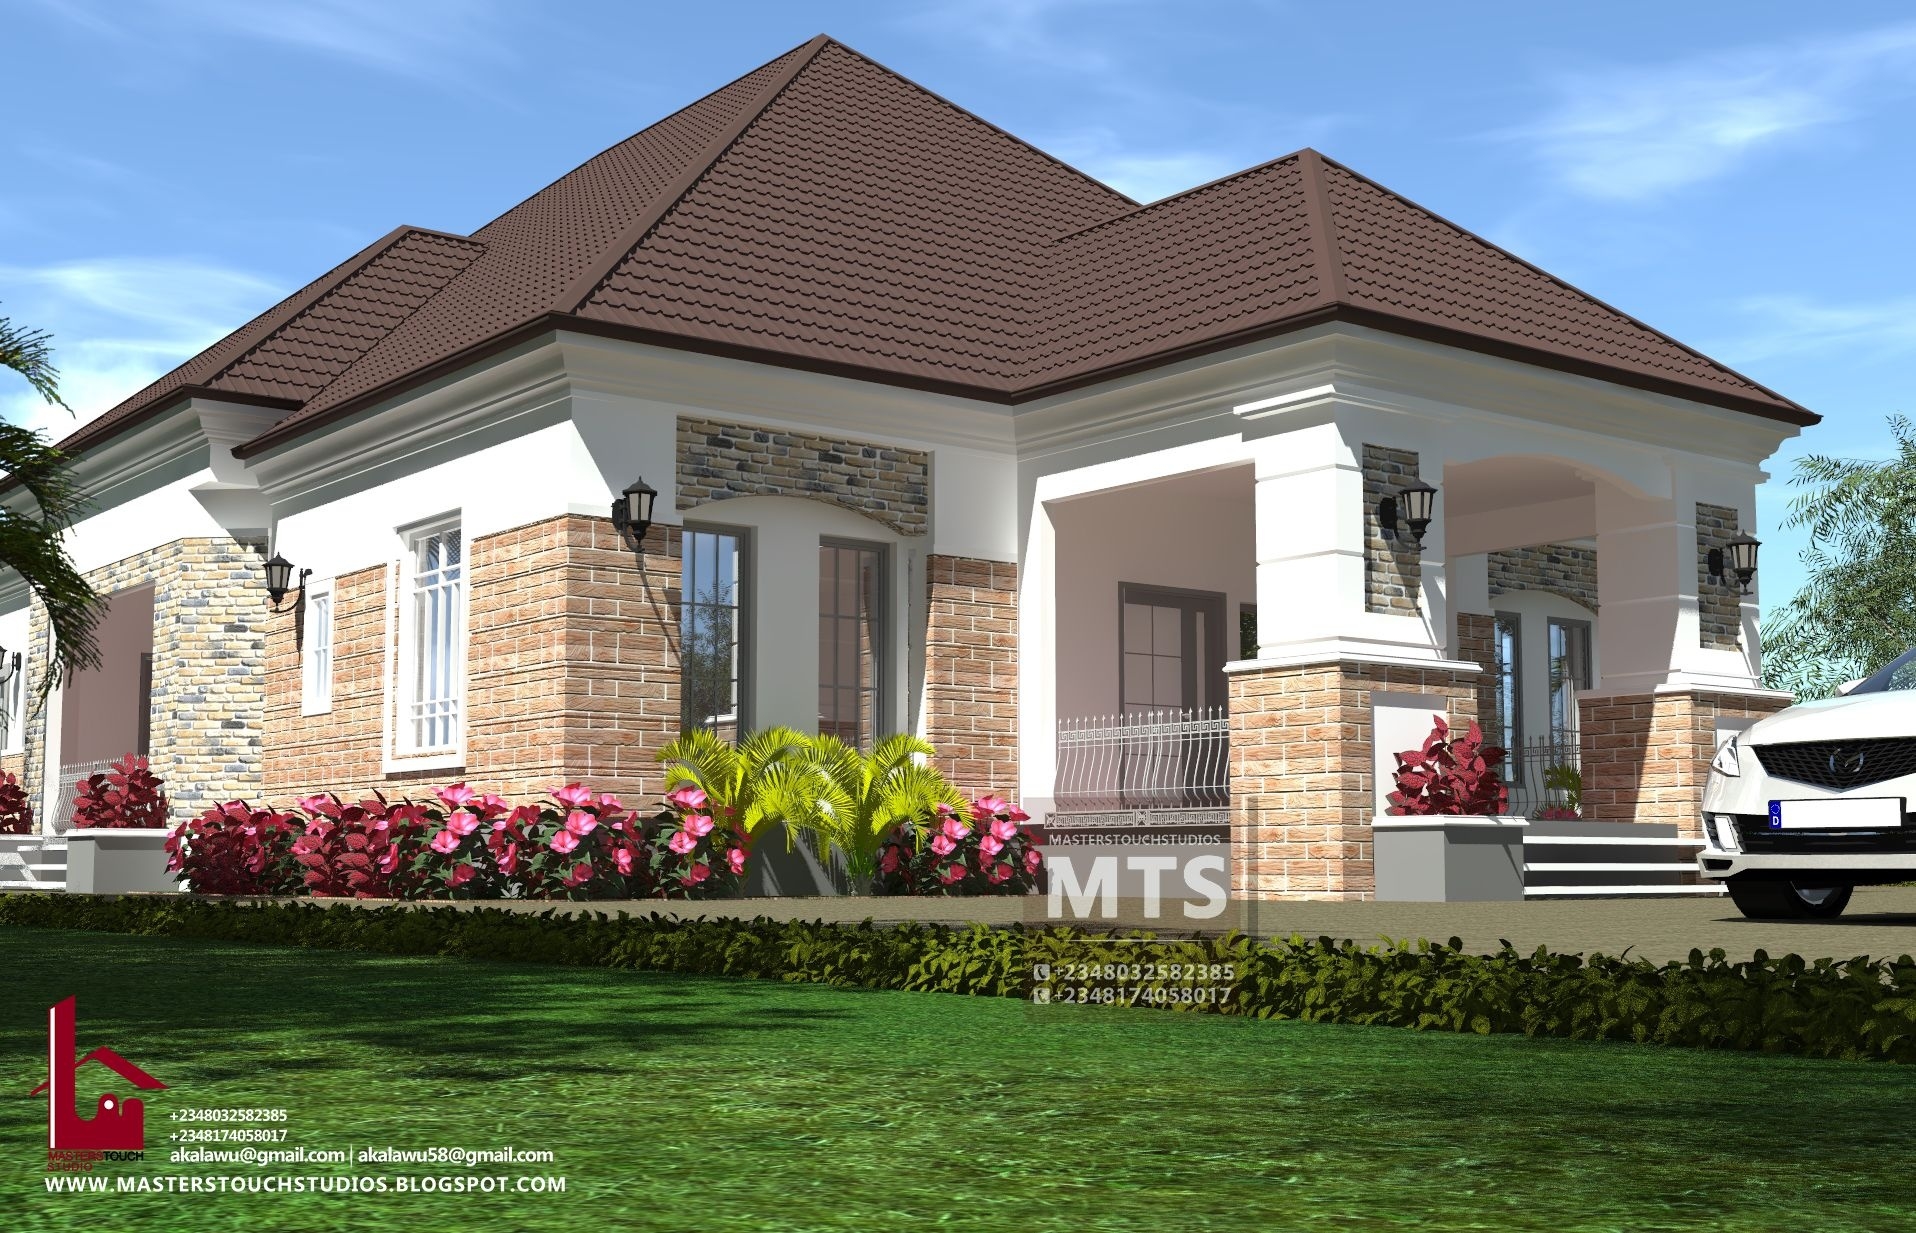 Outstanding #architecture #nigerianbuildingdesigns #masterstouchstudios # intended for astonishing building plans 5 bedroom in nigeria